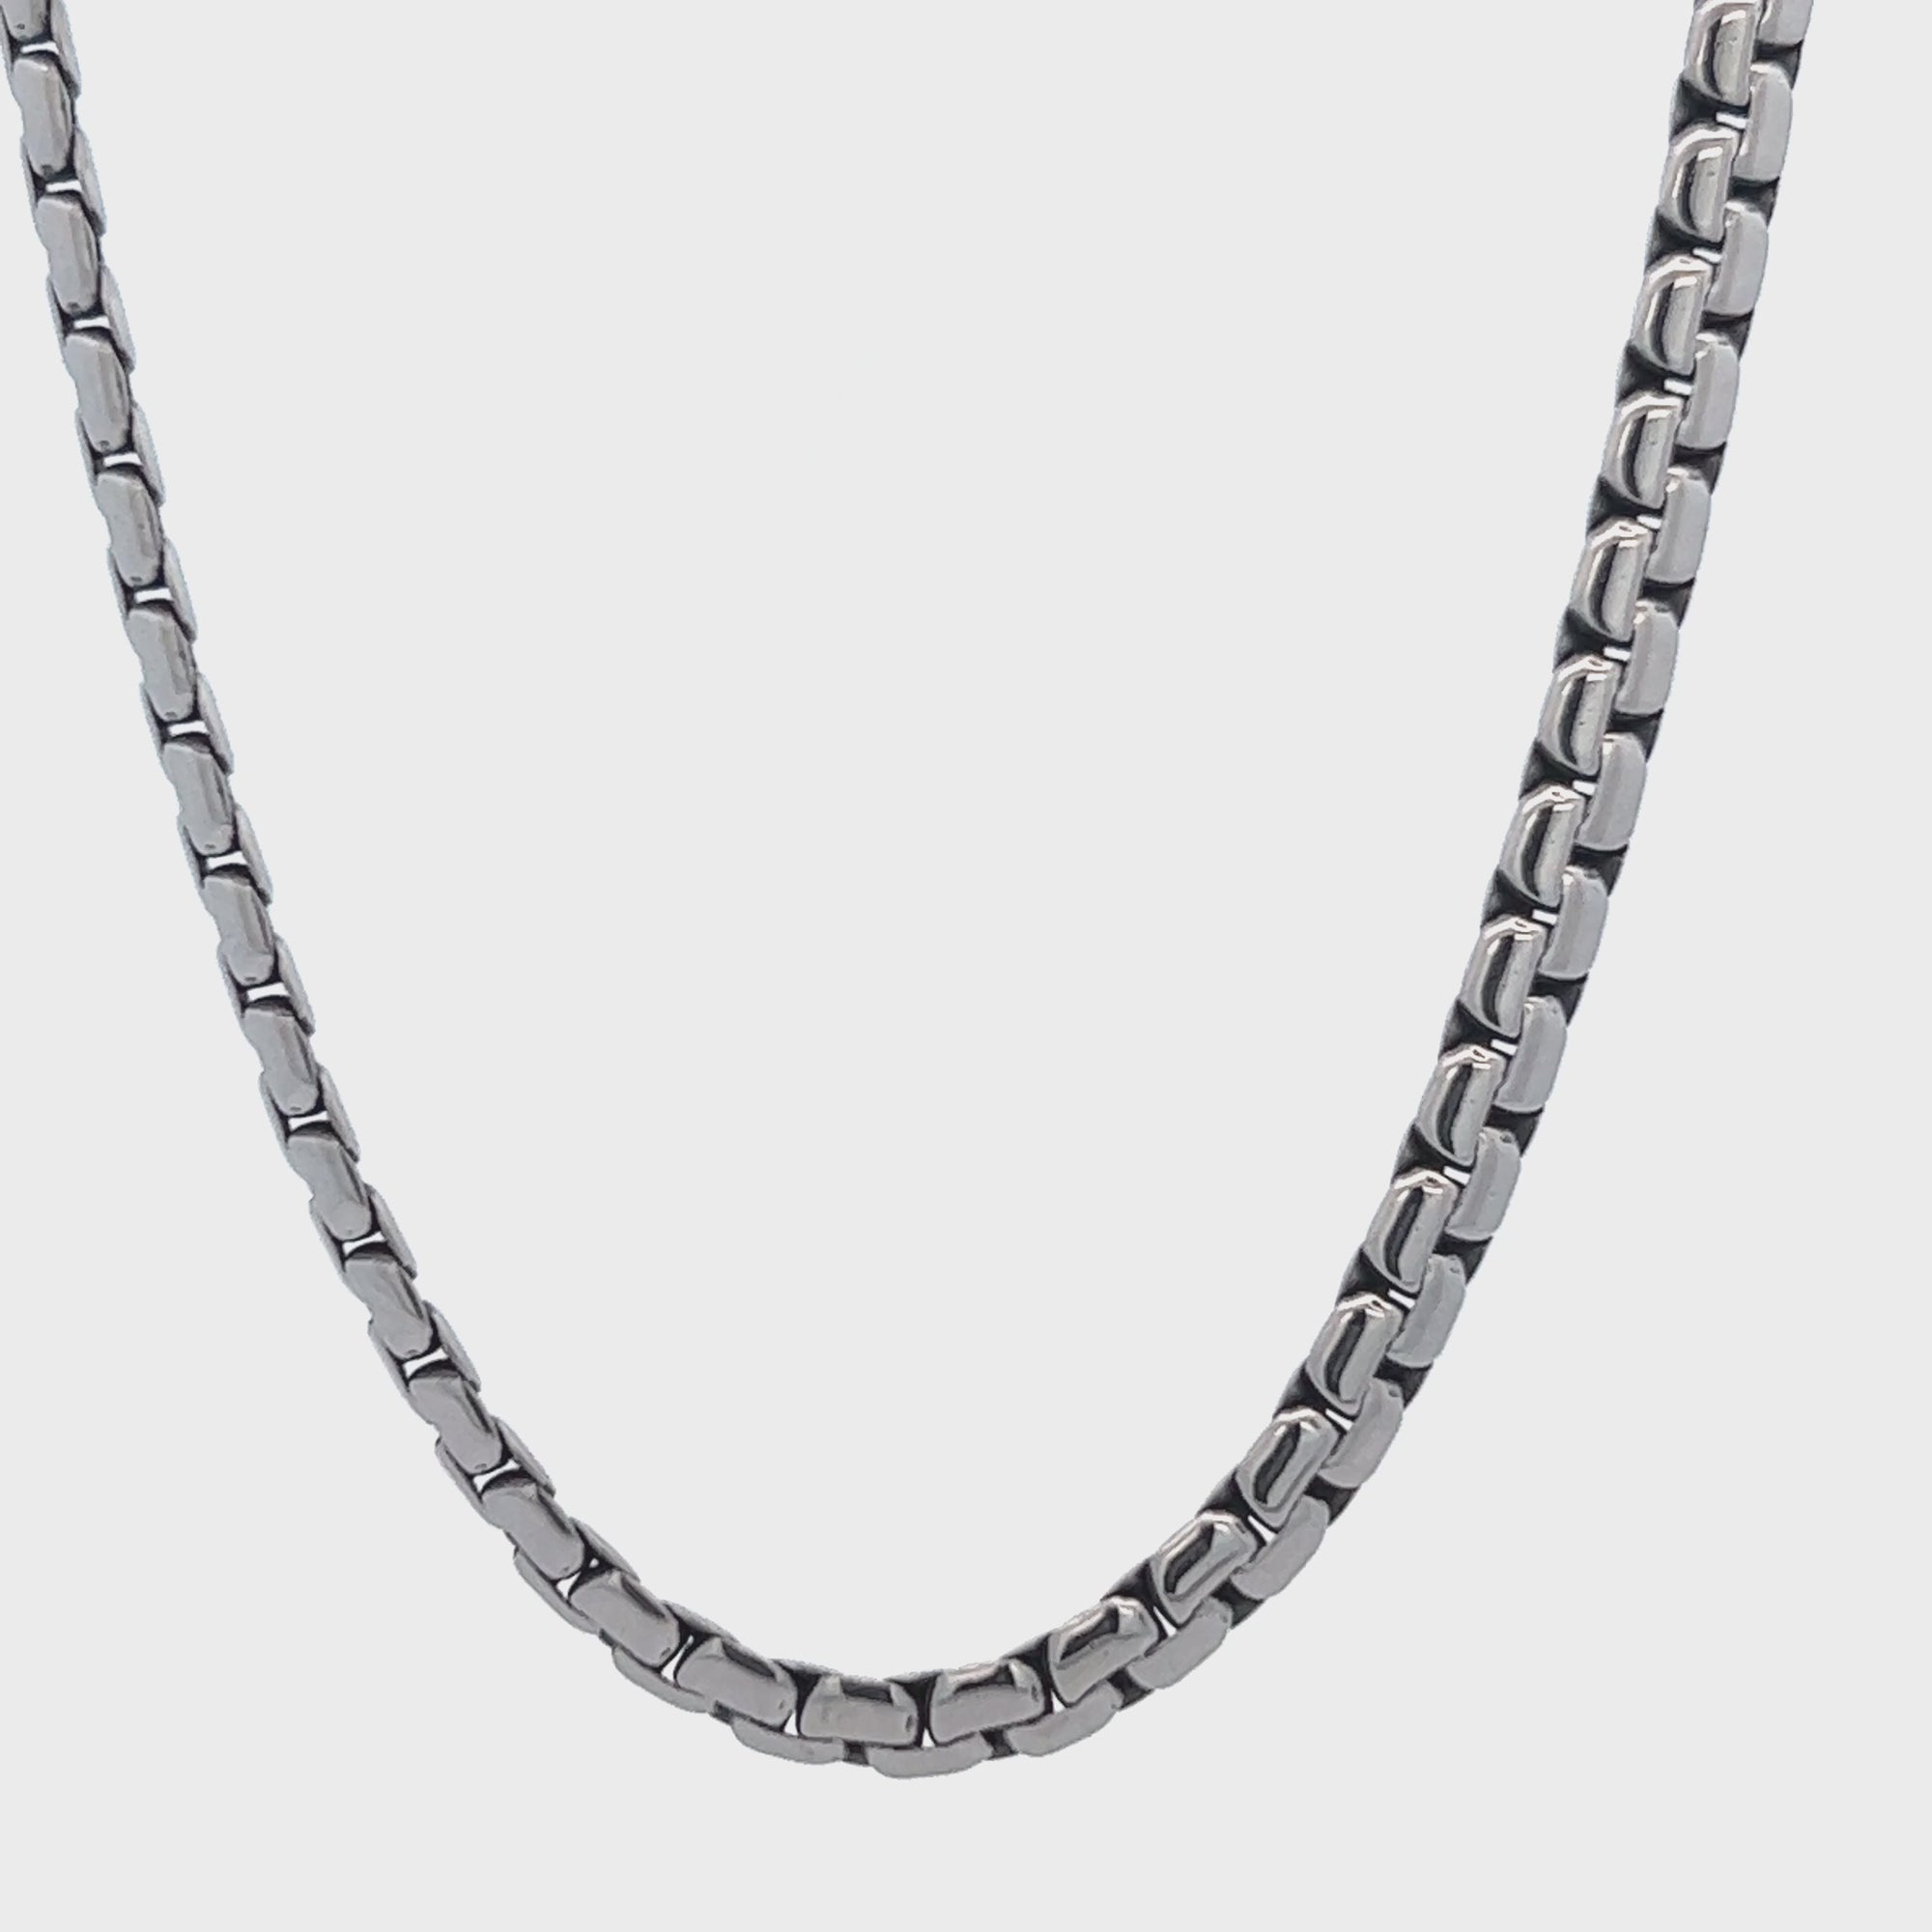 Antiqued Silver Tone Stainless Steel 5mm Flat Square Chain